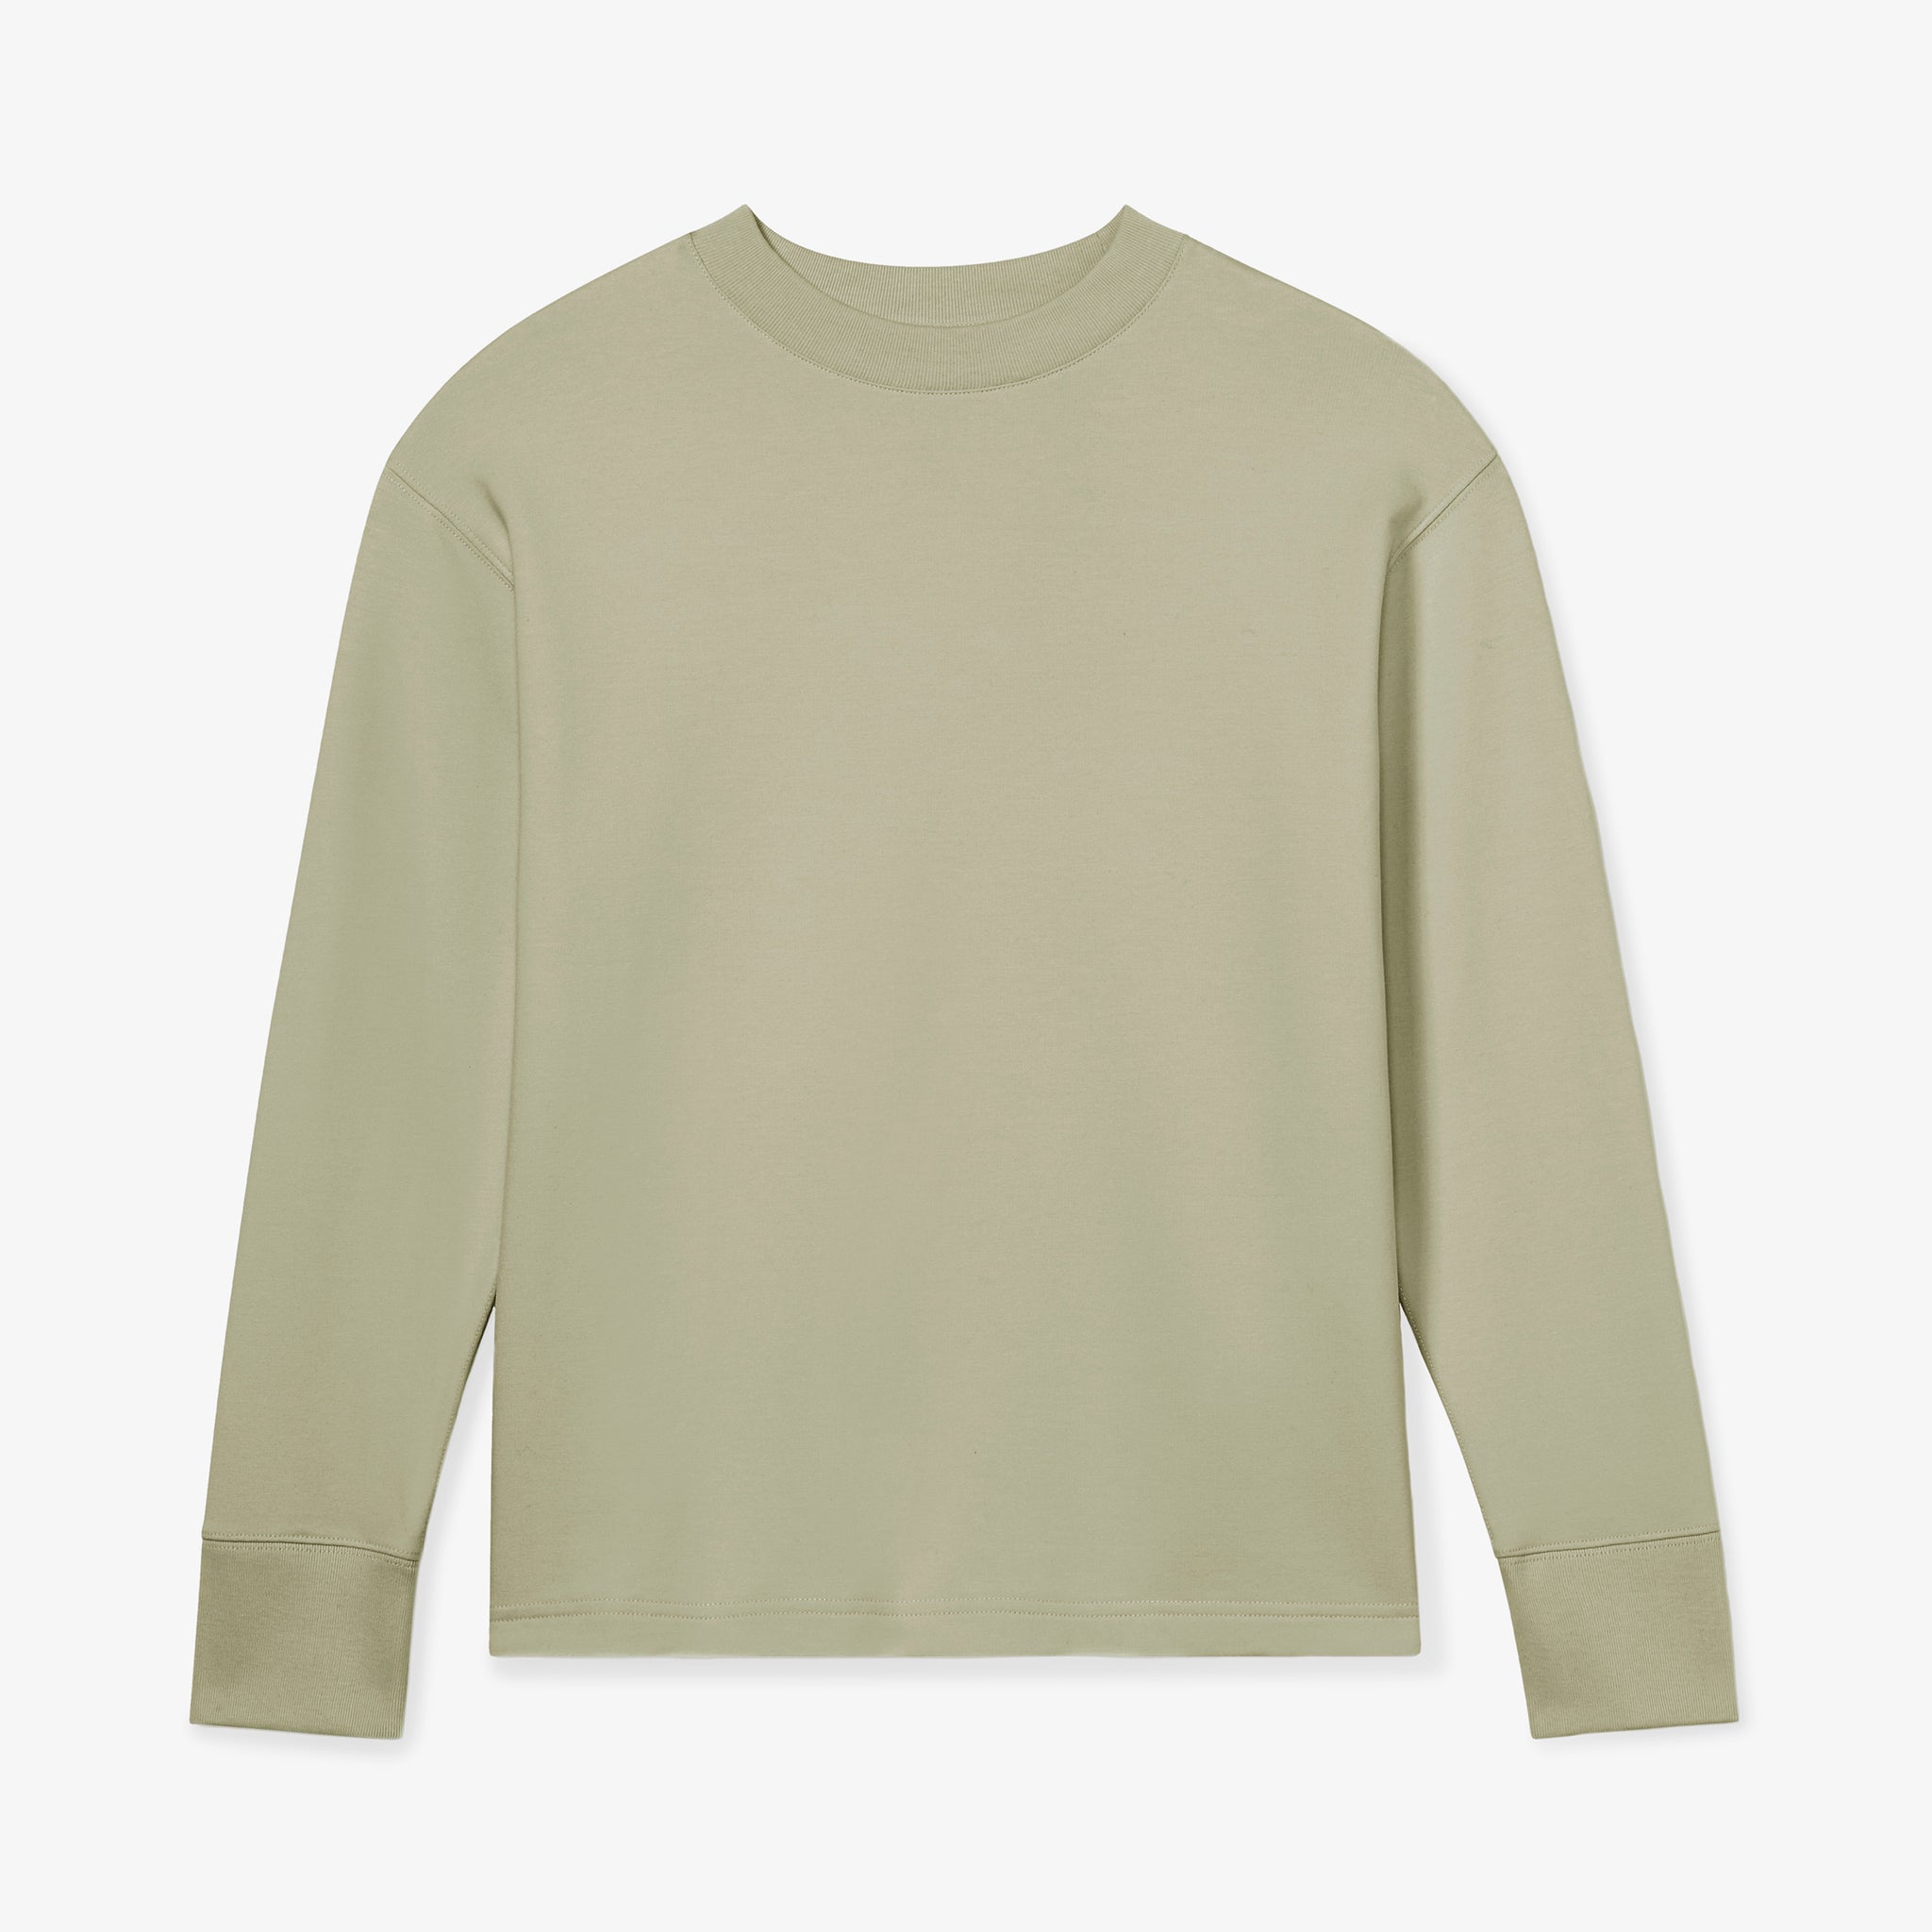 Packshot image of the Ellie Pullover - Light French Terry in Laurel Green